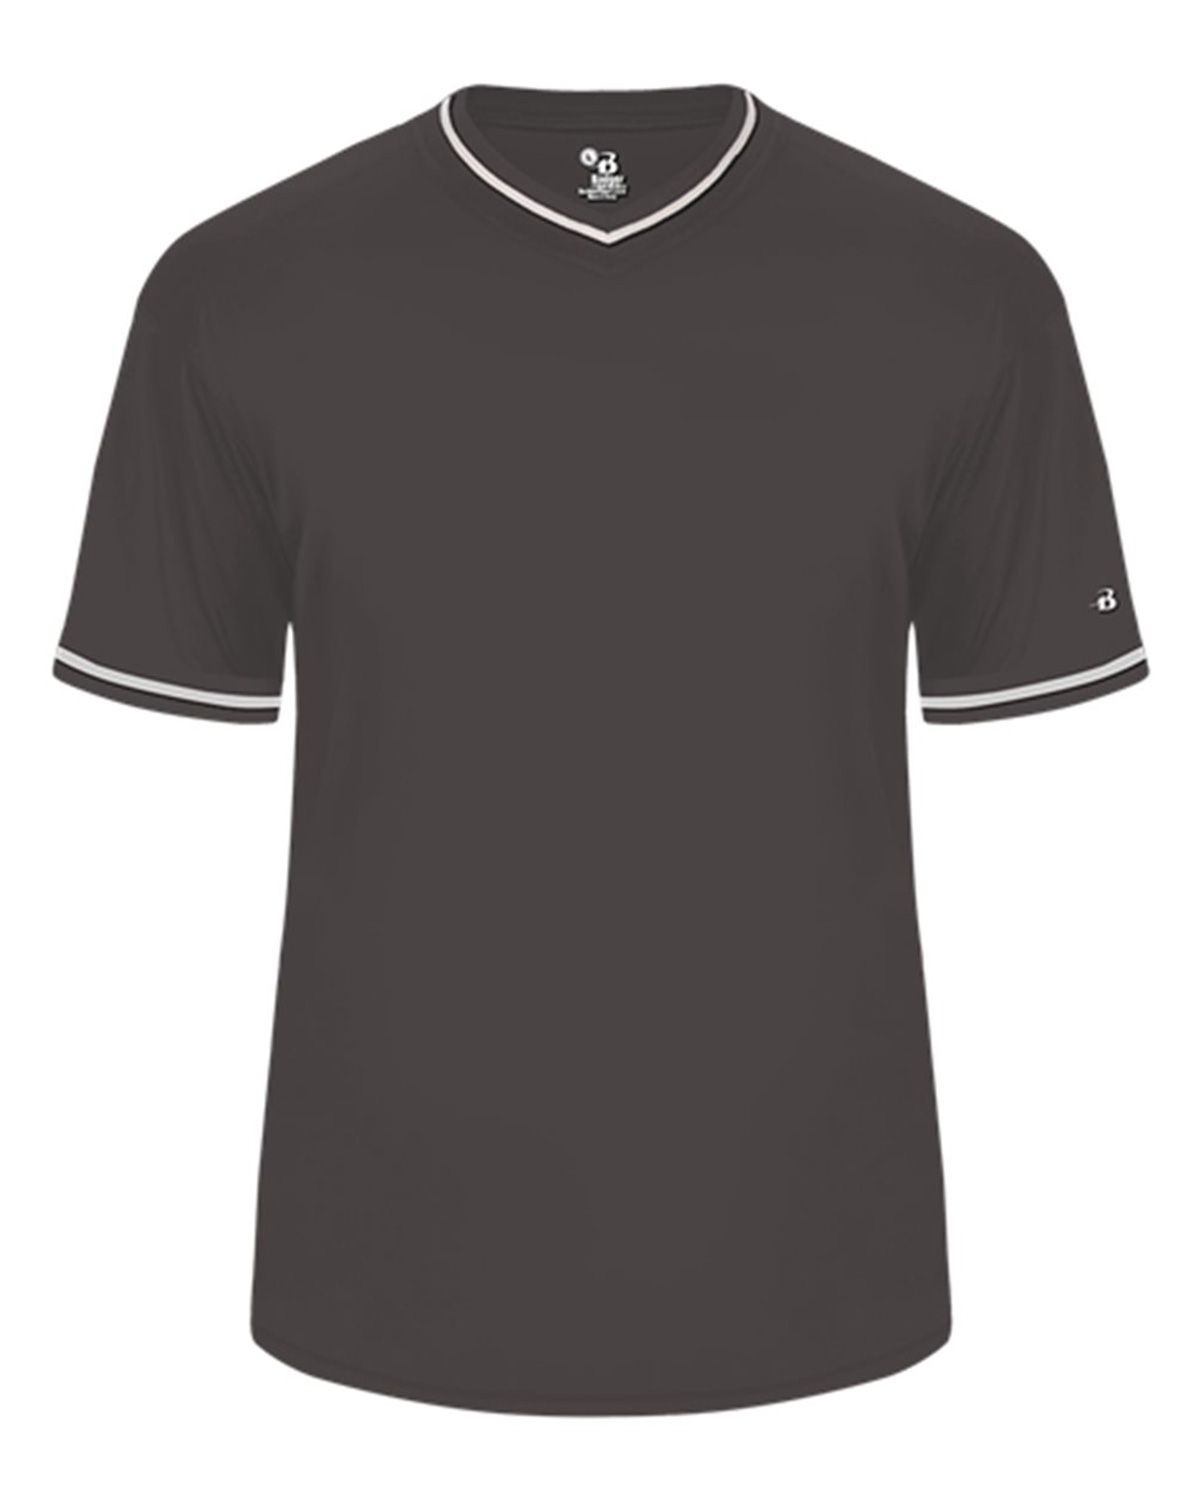 Badger 2974 Youth Vintage Jersey - Graphite/ Graphite/ White - XS #vintage